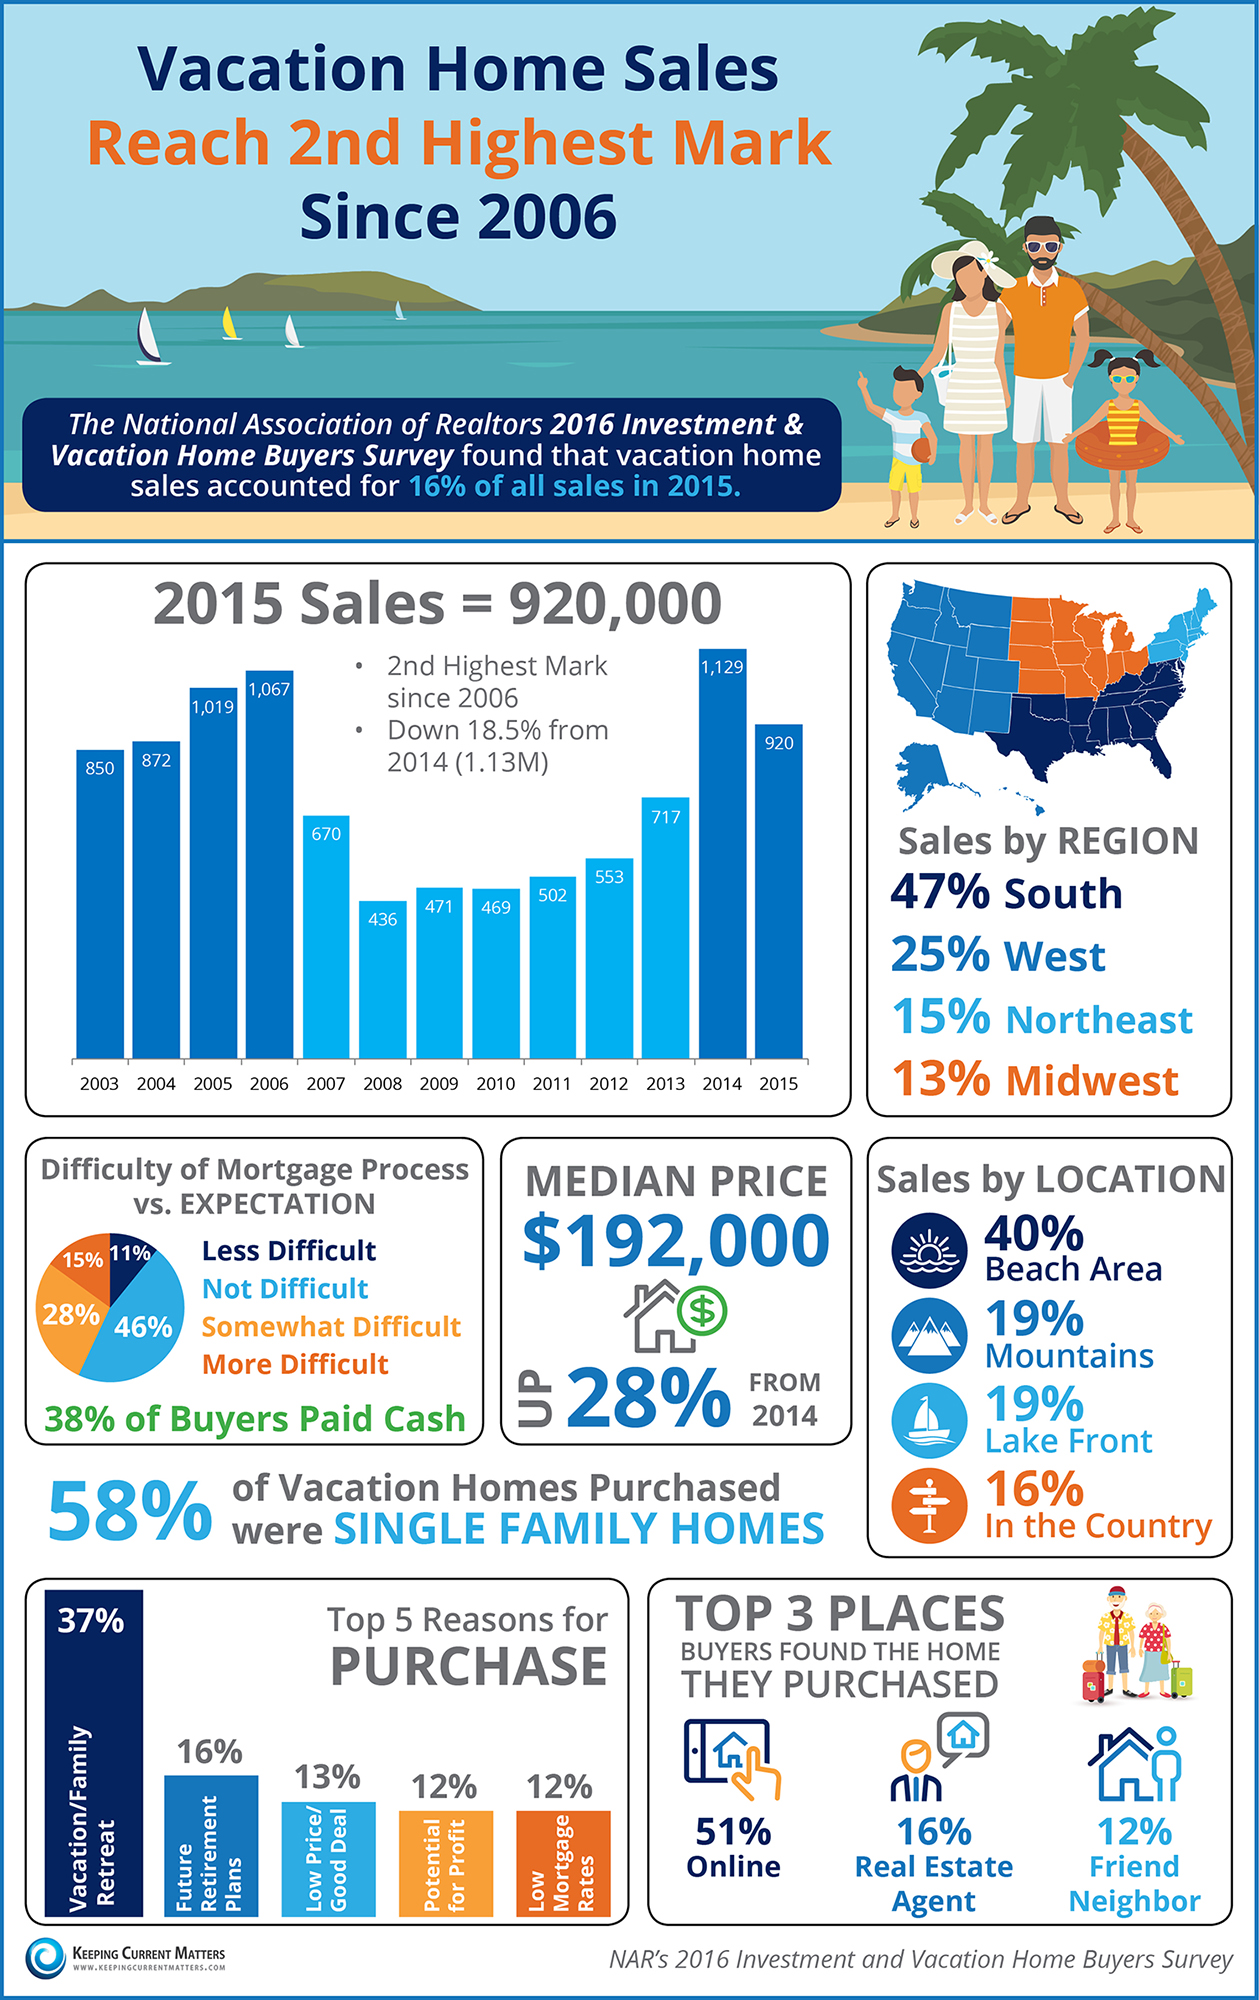 Vacation Home Sales Reach 2nd Highest Mark Since 2006 [INFOGRAPHIC] | Keeping Current Matters